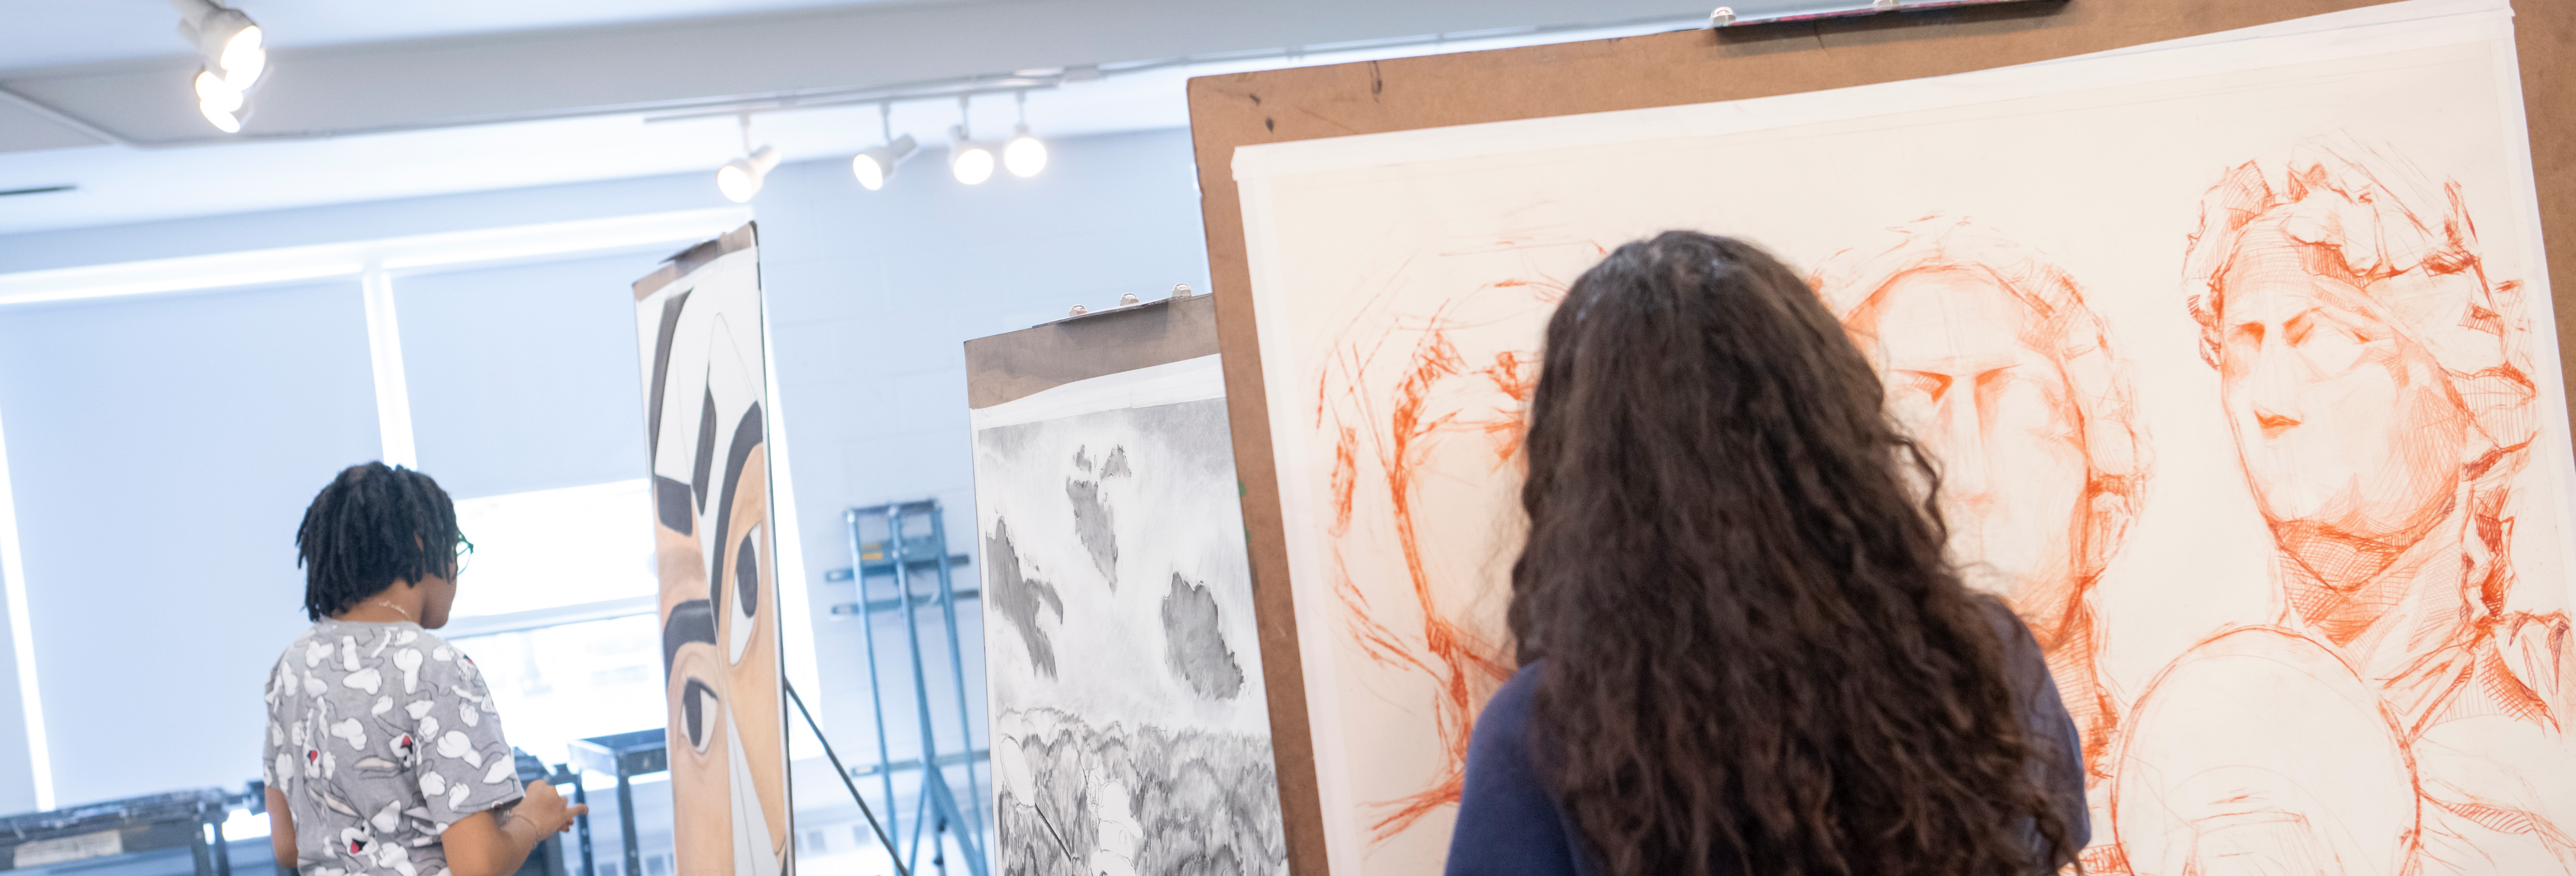 Student Opportunities, drawing class